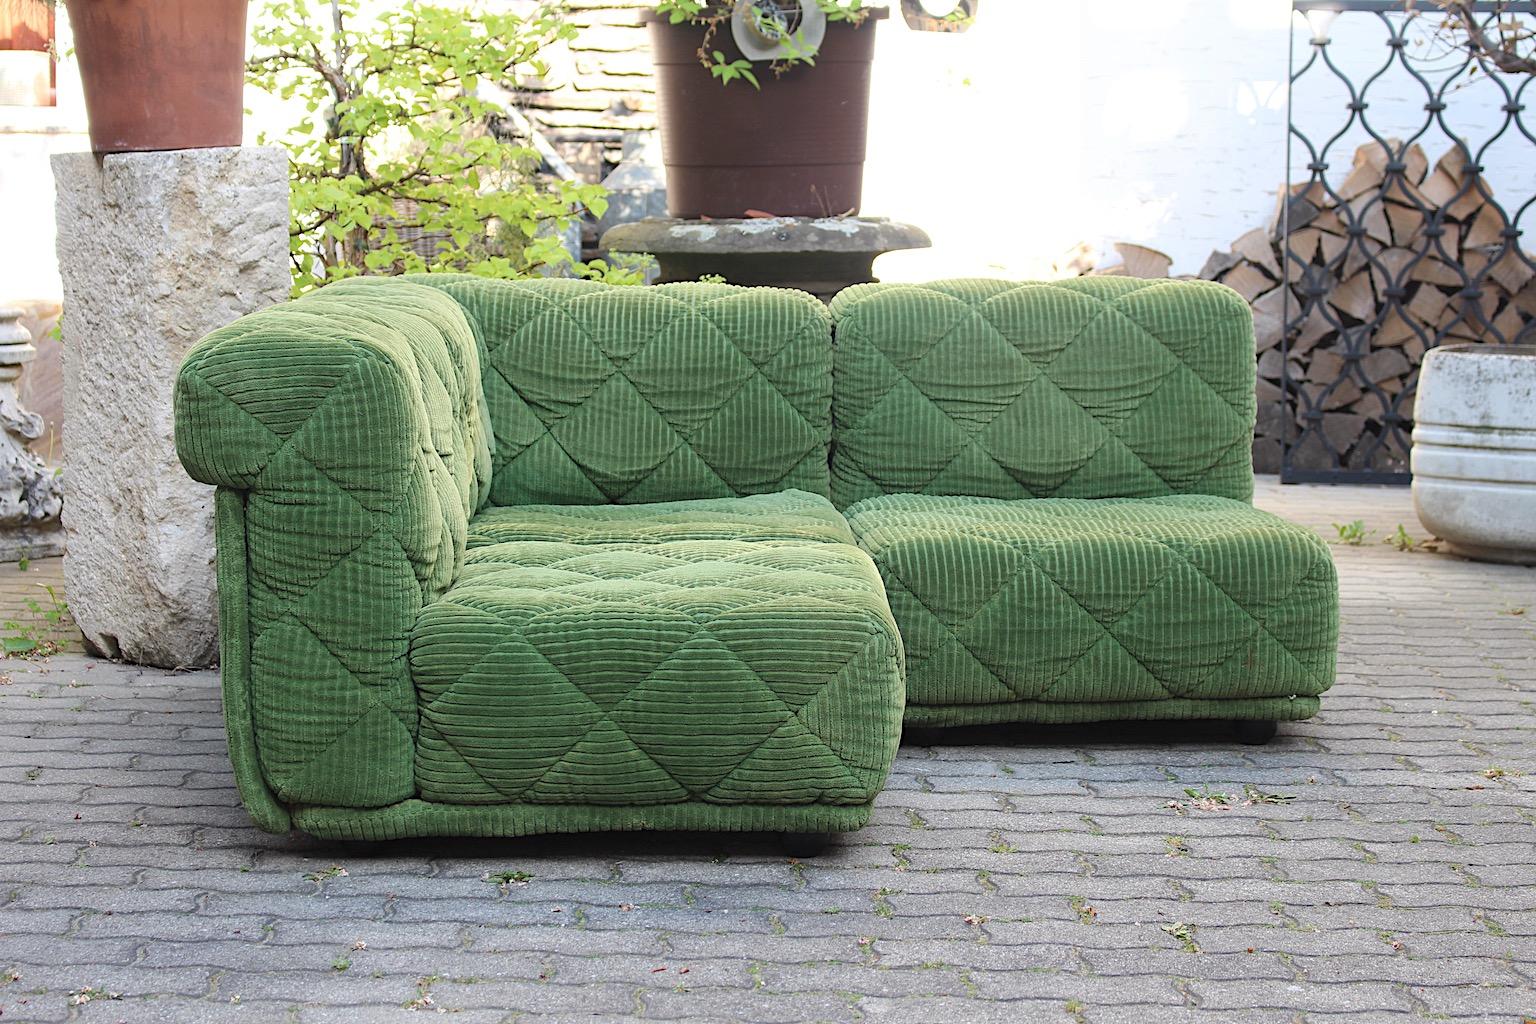 vintage modular couch